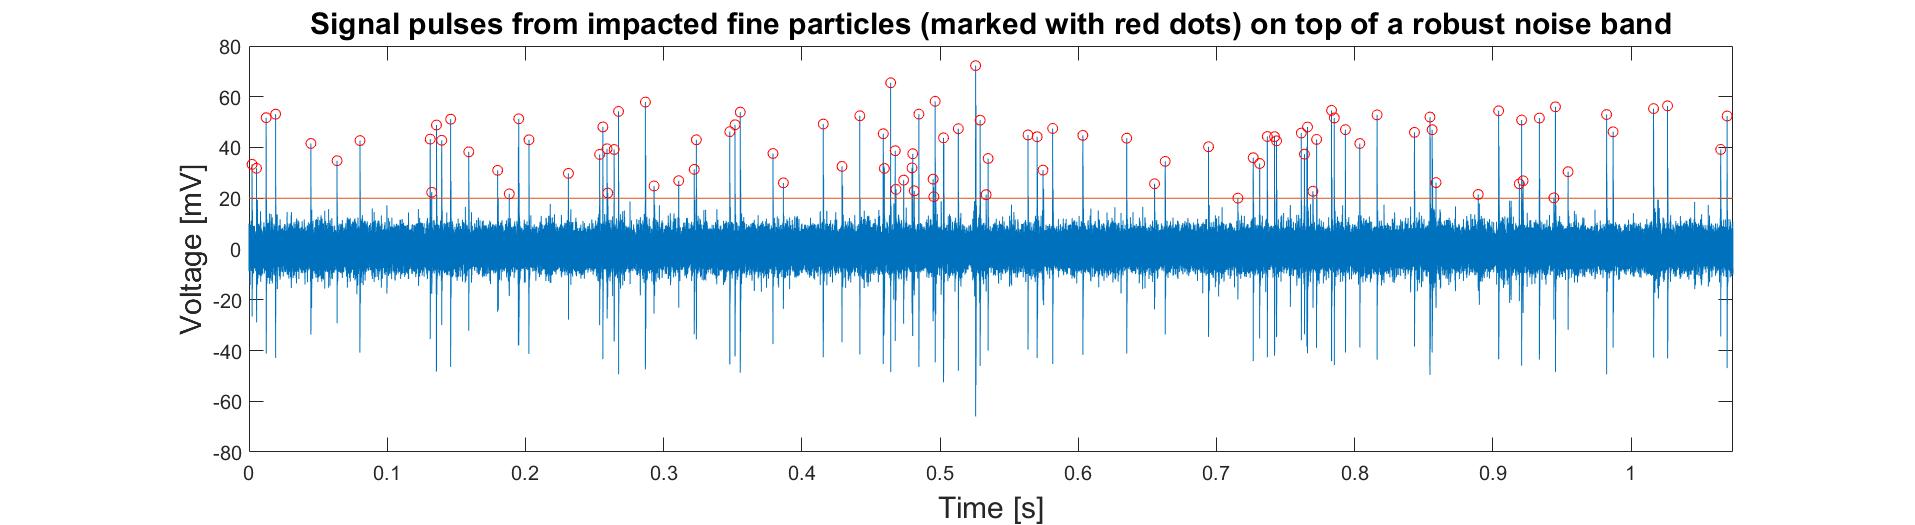 Signal pulses from impacted fine particles